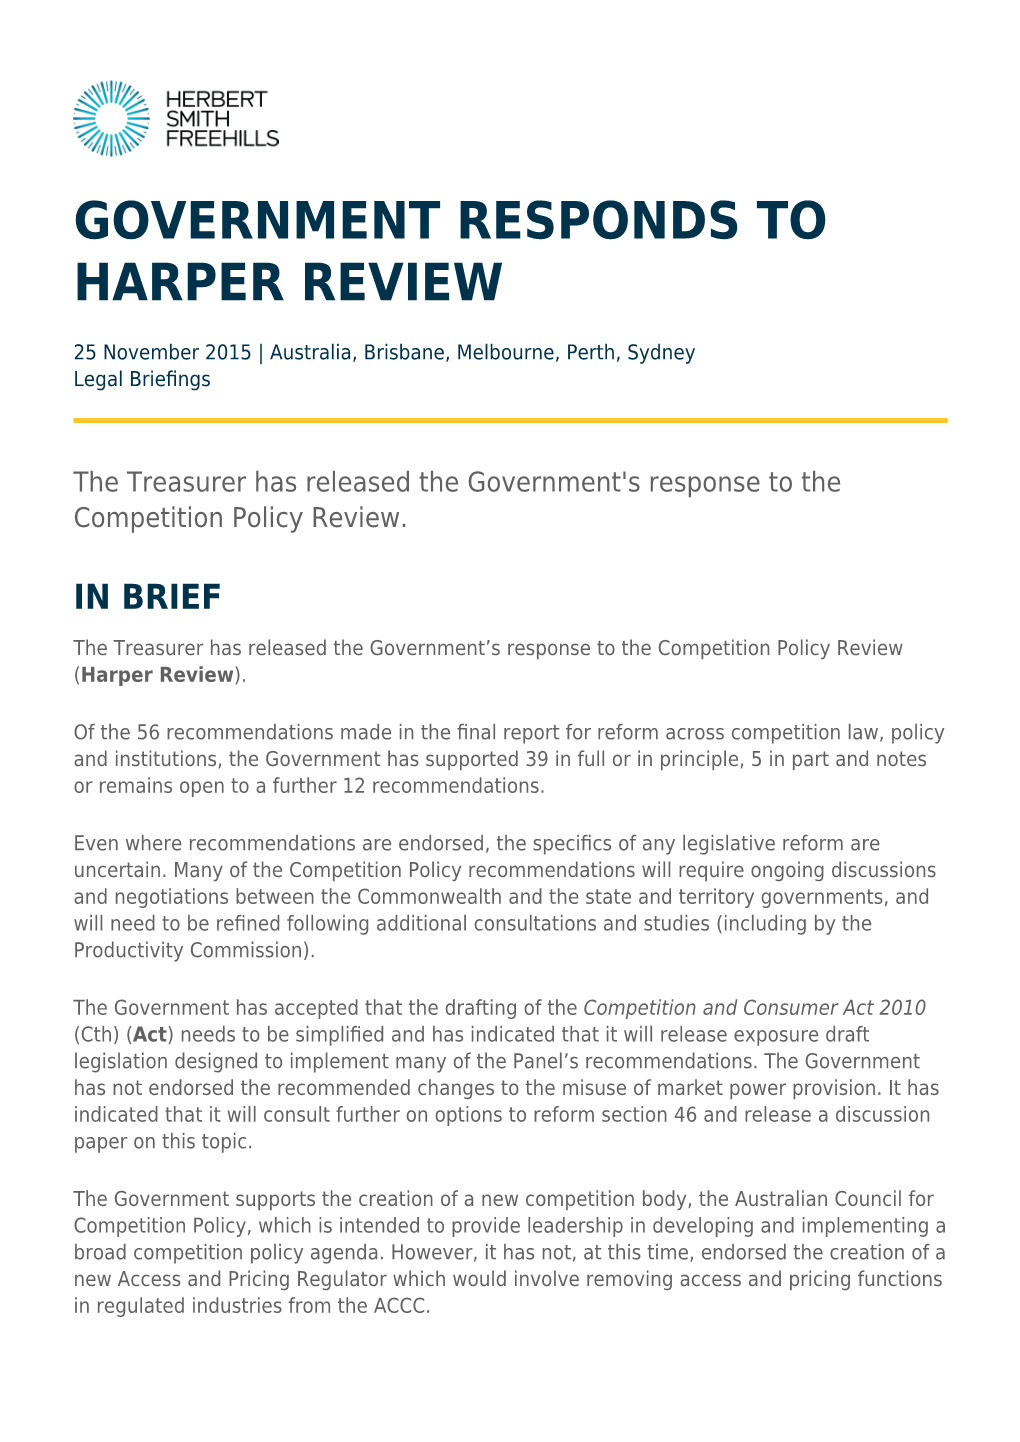 Government Responds to Harper Review